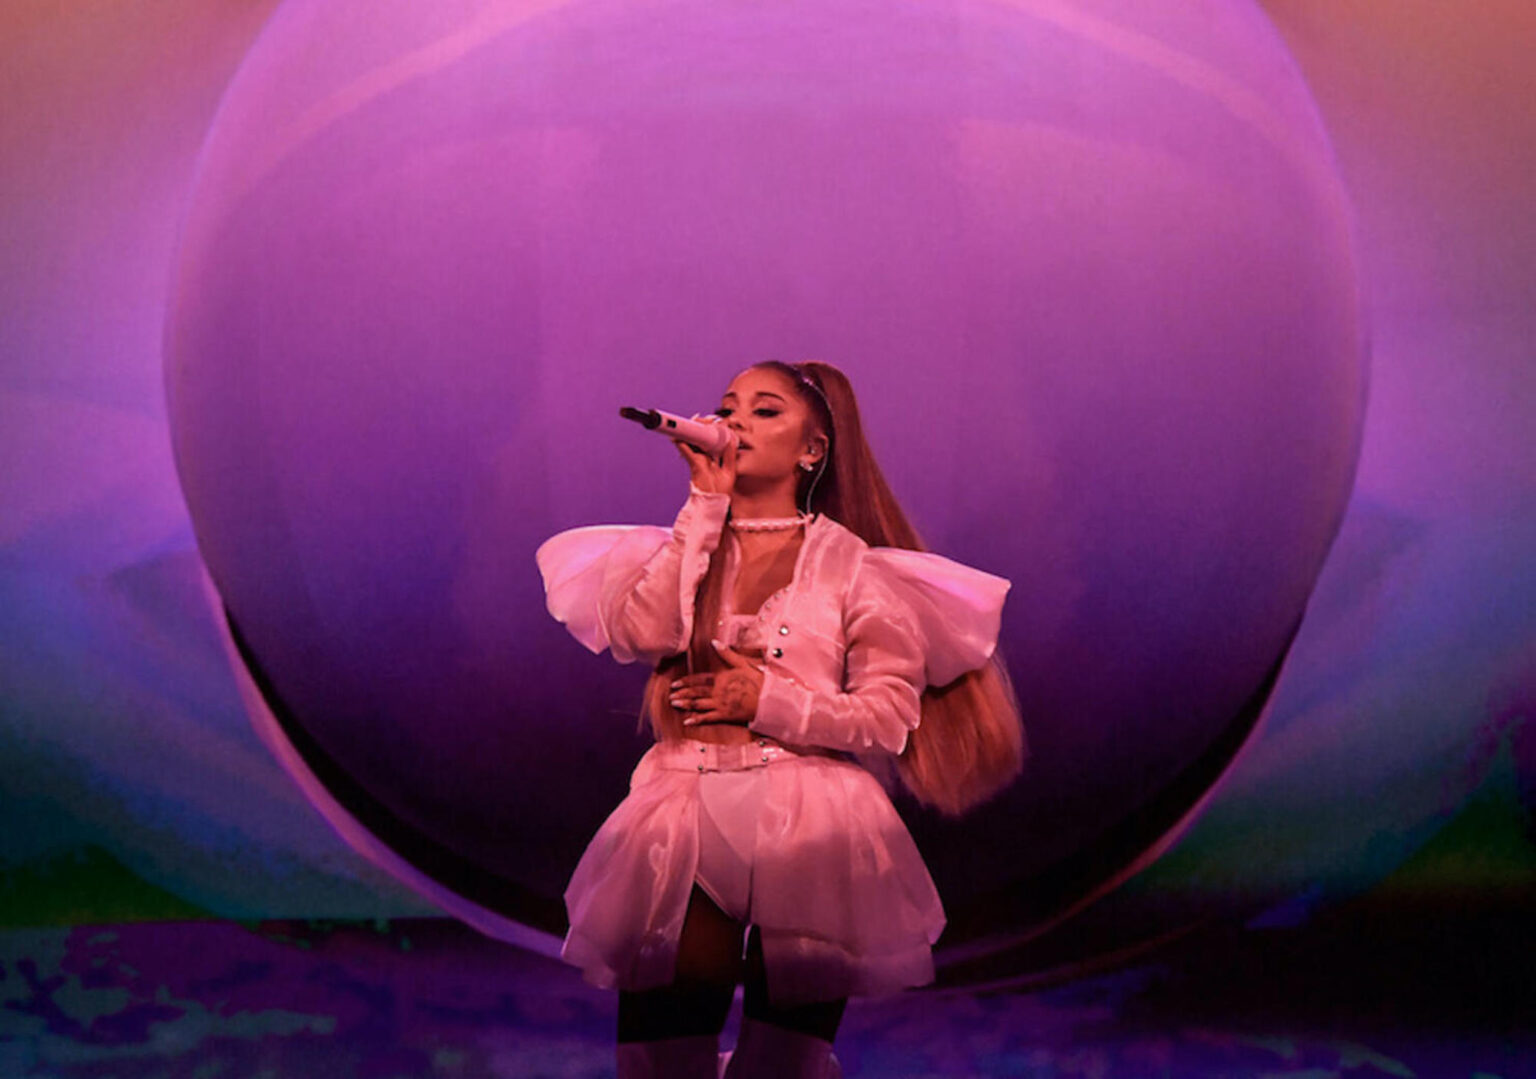 Ariana Grande has a new Netflix documentary. Here are the best moments from Sweetener Tour the doc let us see.